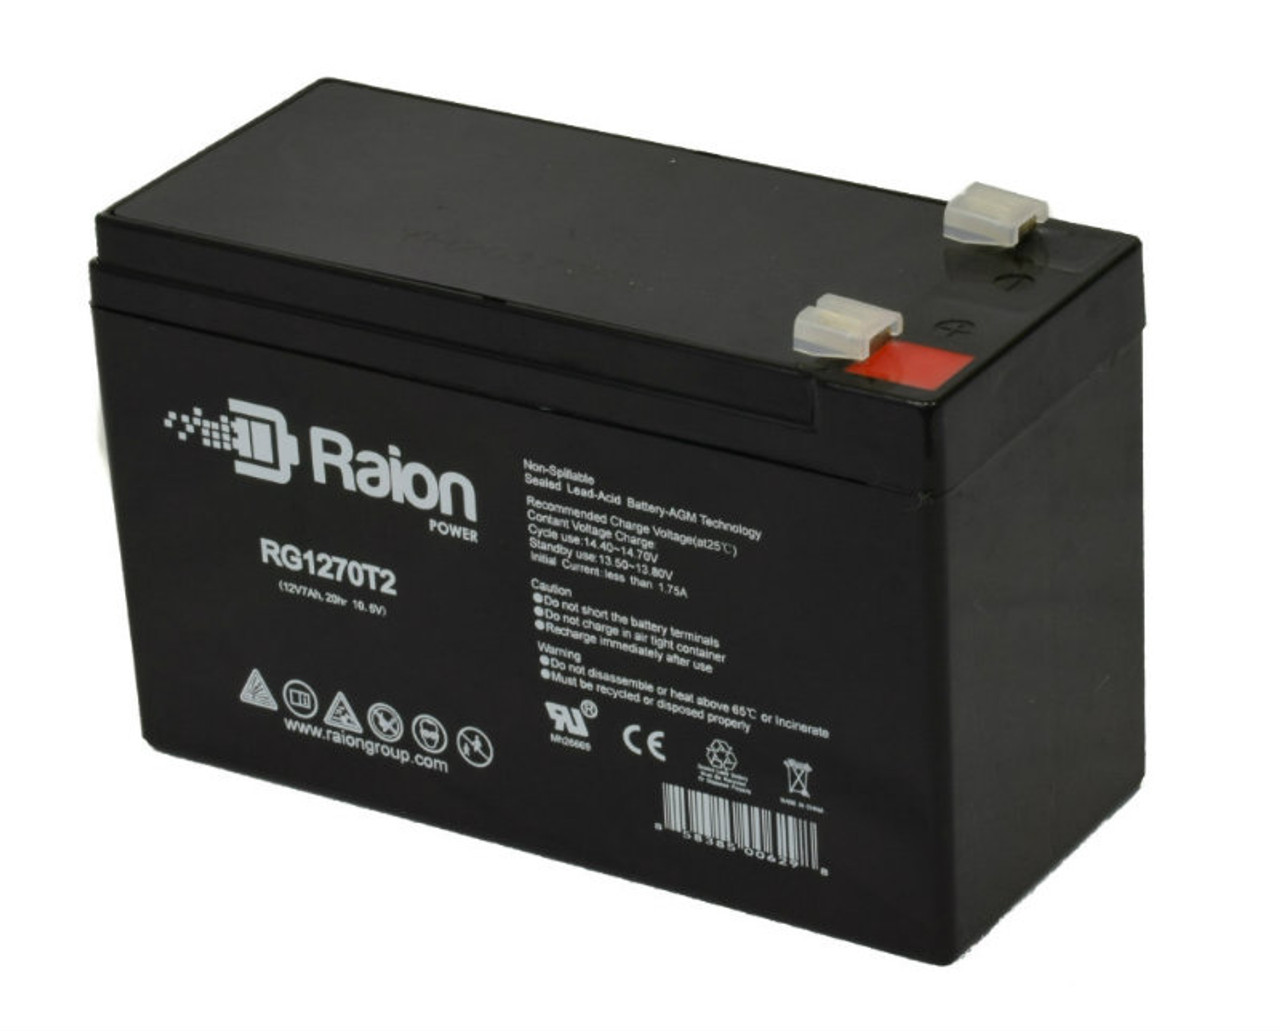 Raion Power RG1270T1 12V 7Ah Non-Spillable Replacement Battery for MK ES7-12 F1